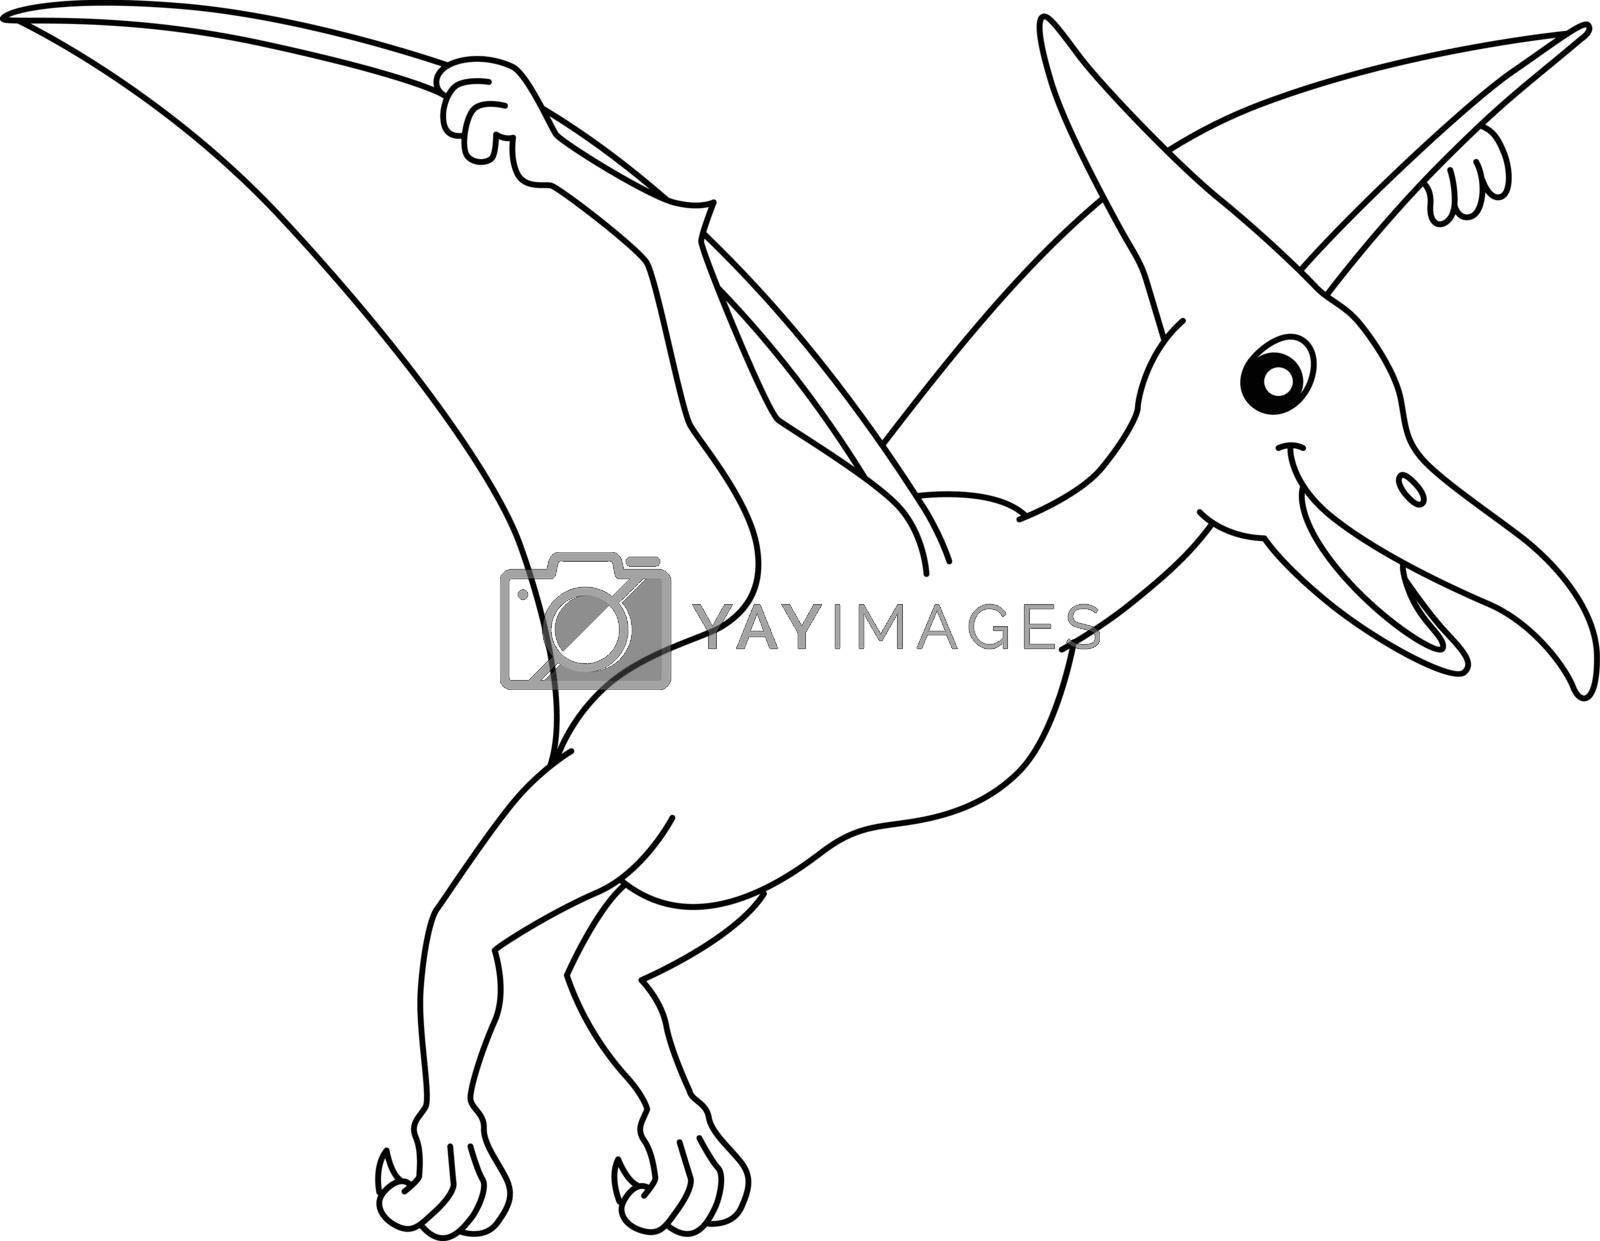 Royalty free image of Pterodactyl Coloring Isolated Page for Kids by abbydesign